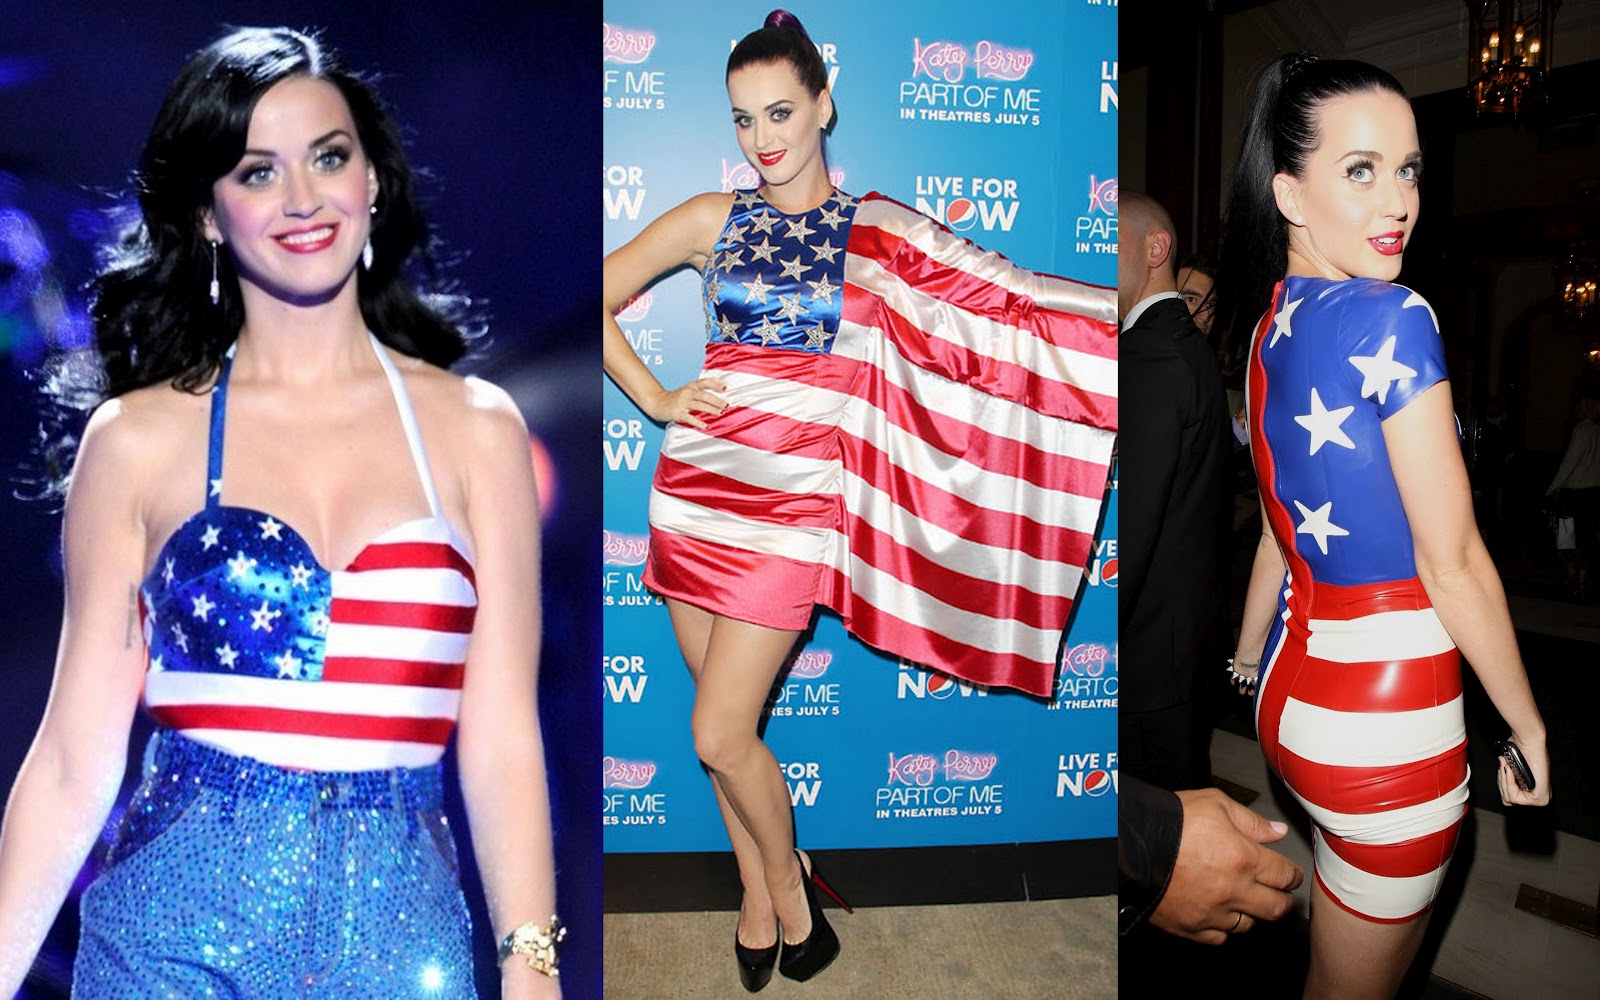 http://3.bp.blogspot.com/-Bw6trurm3VQ/T_G0JAntMWI/AAAAAAAAmFQ/1dElGGiBSrI/s1600/Katy Perry American Flag outfit stars and strips USA Fourth of July.jpg